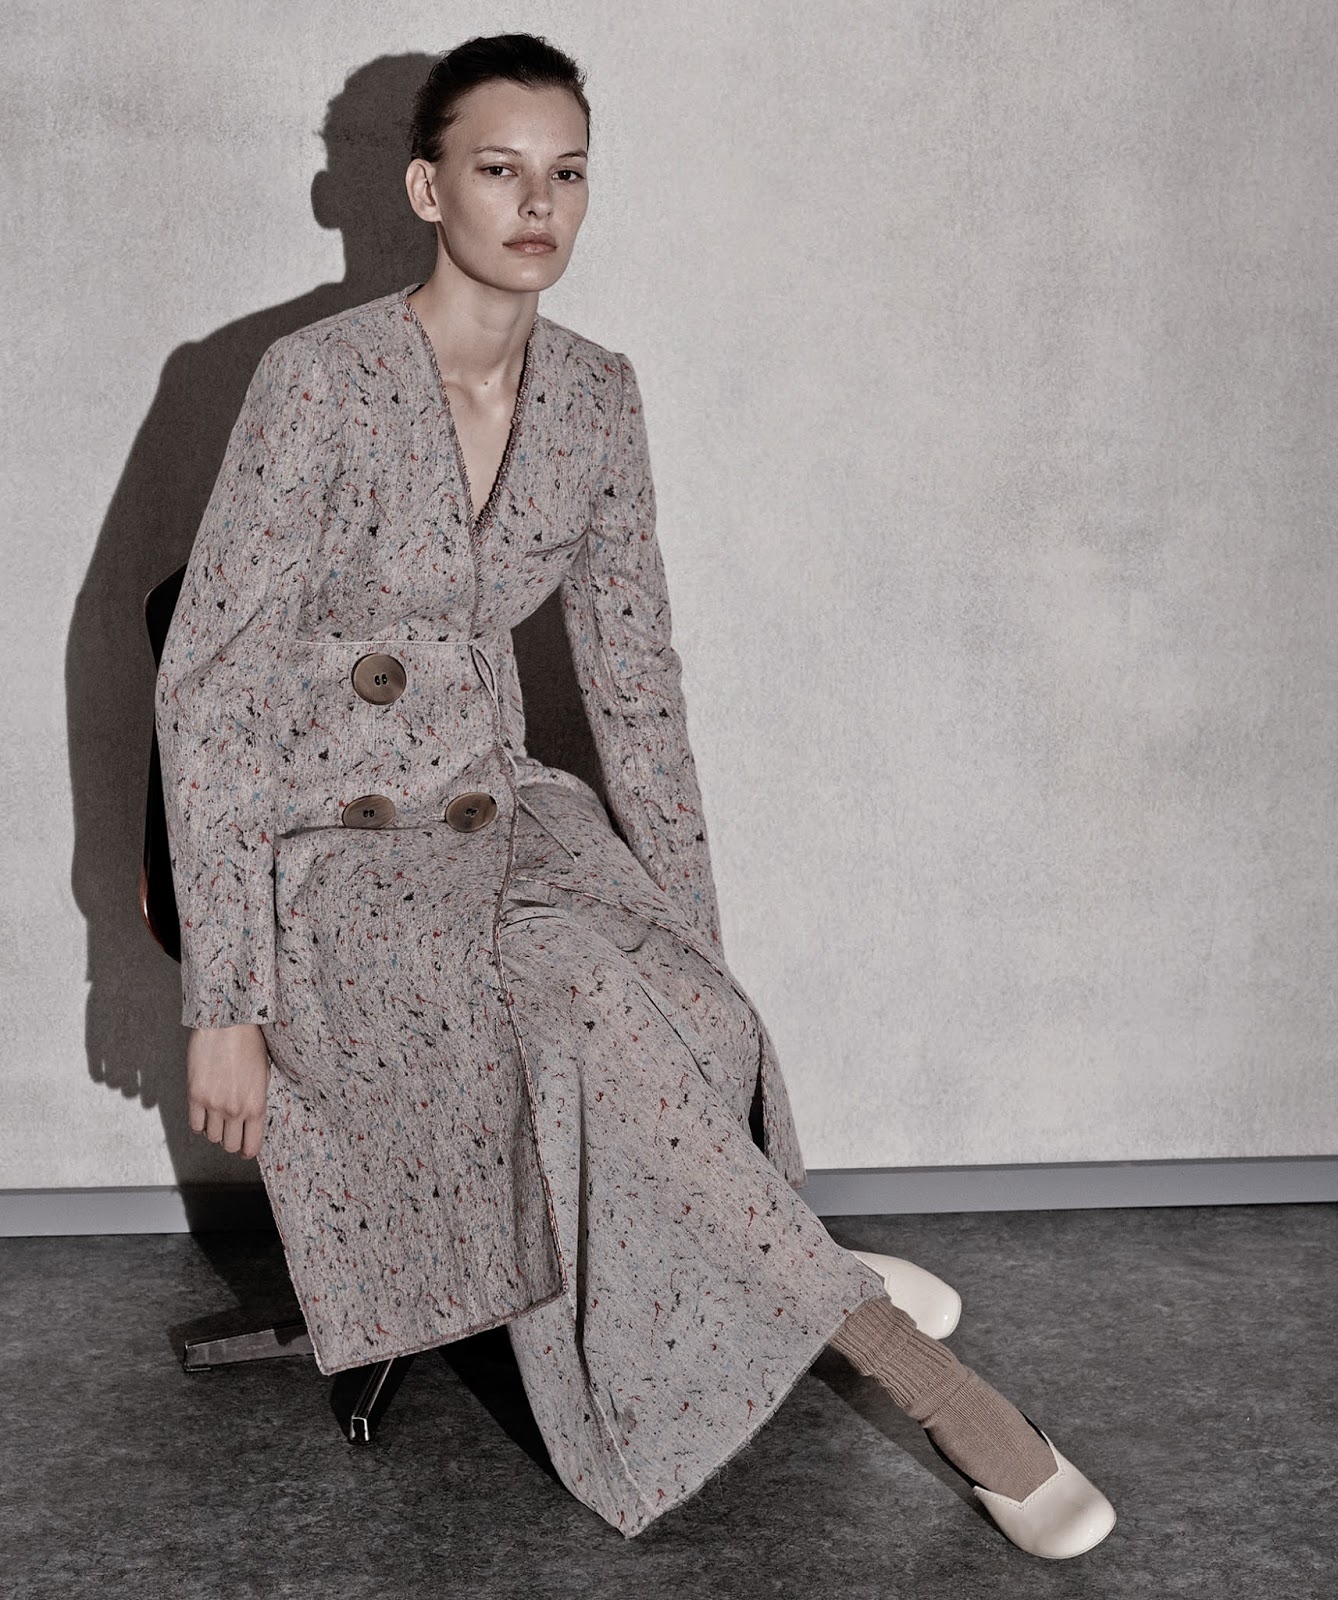 a soft touch: amanda murphy by josh olins for wsj june 2014 | visual ...